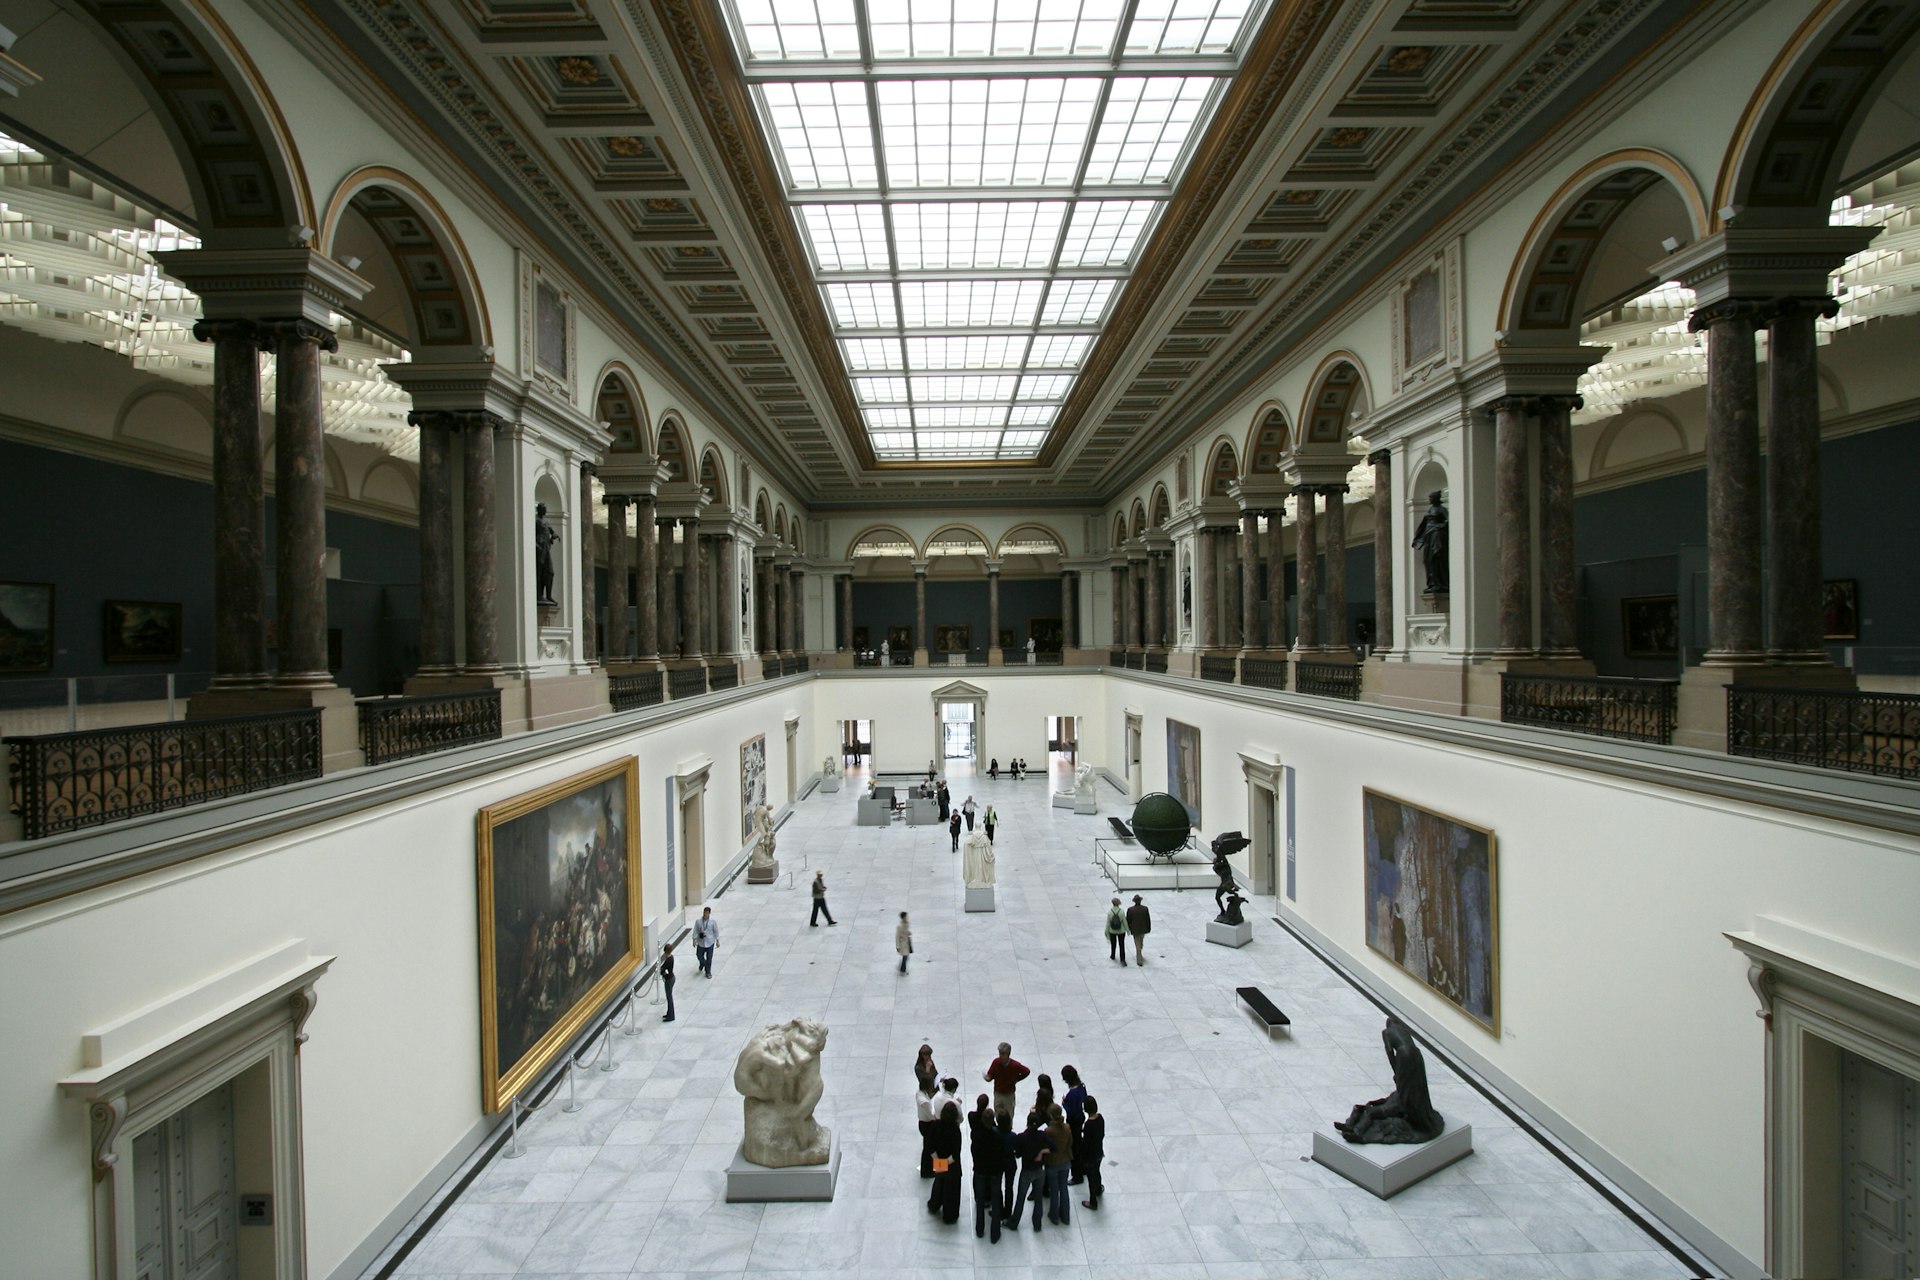 The main hall of the Musees Royaux des Beaux-Arts. The white interiors are dotted with artworks, which people walk between and stand to admire.